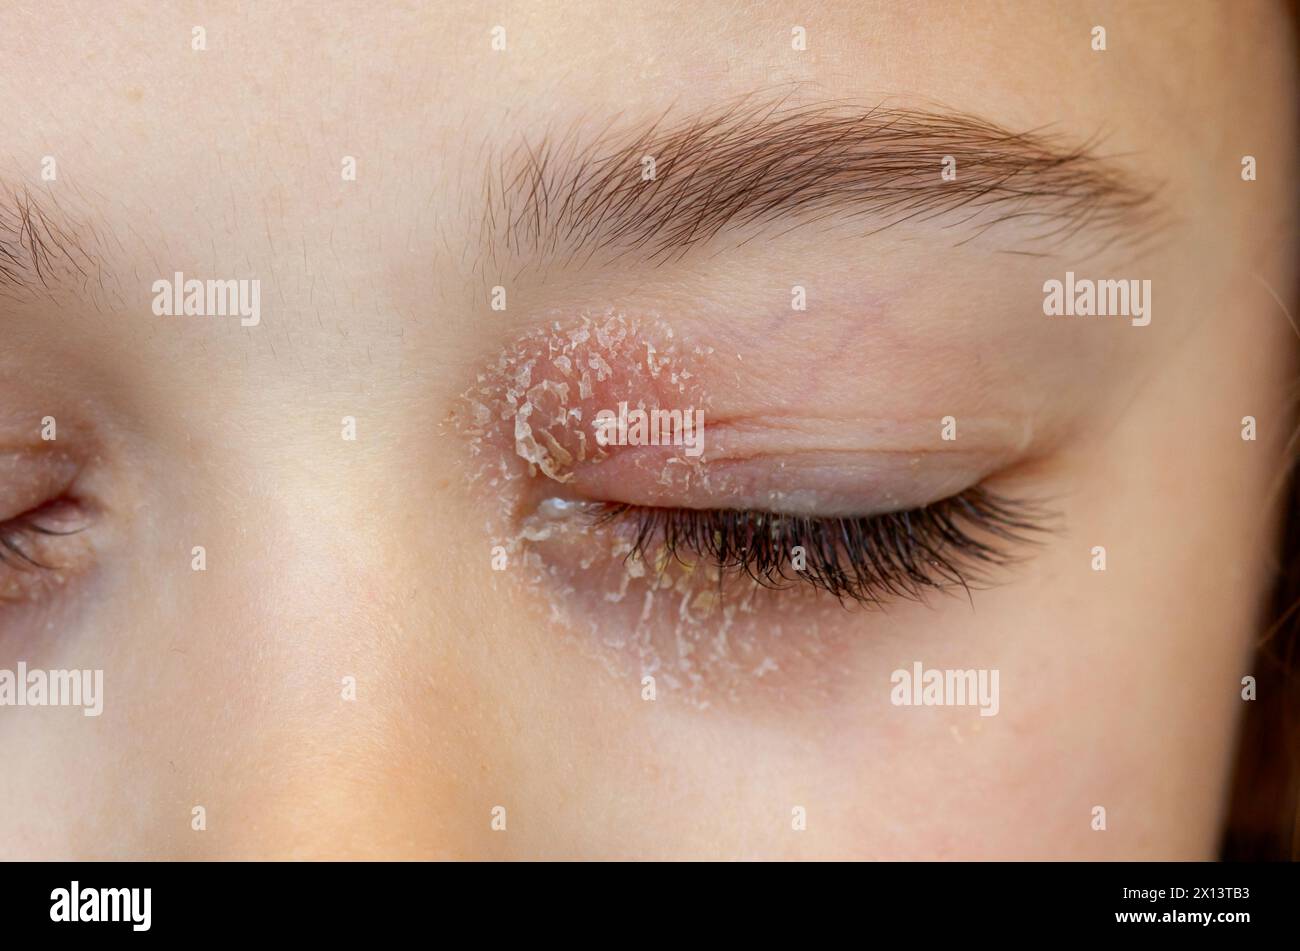 Closed eye of a little girl suffering from ocular atopic dermatitis or eyelid eczema. Stock Photo